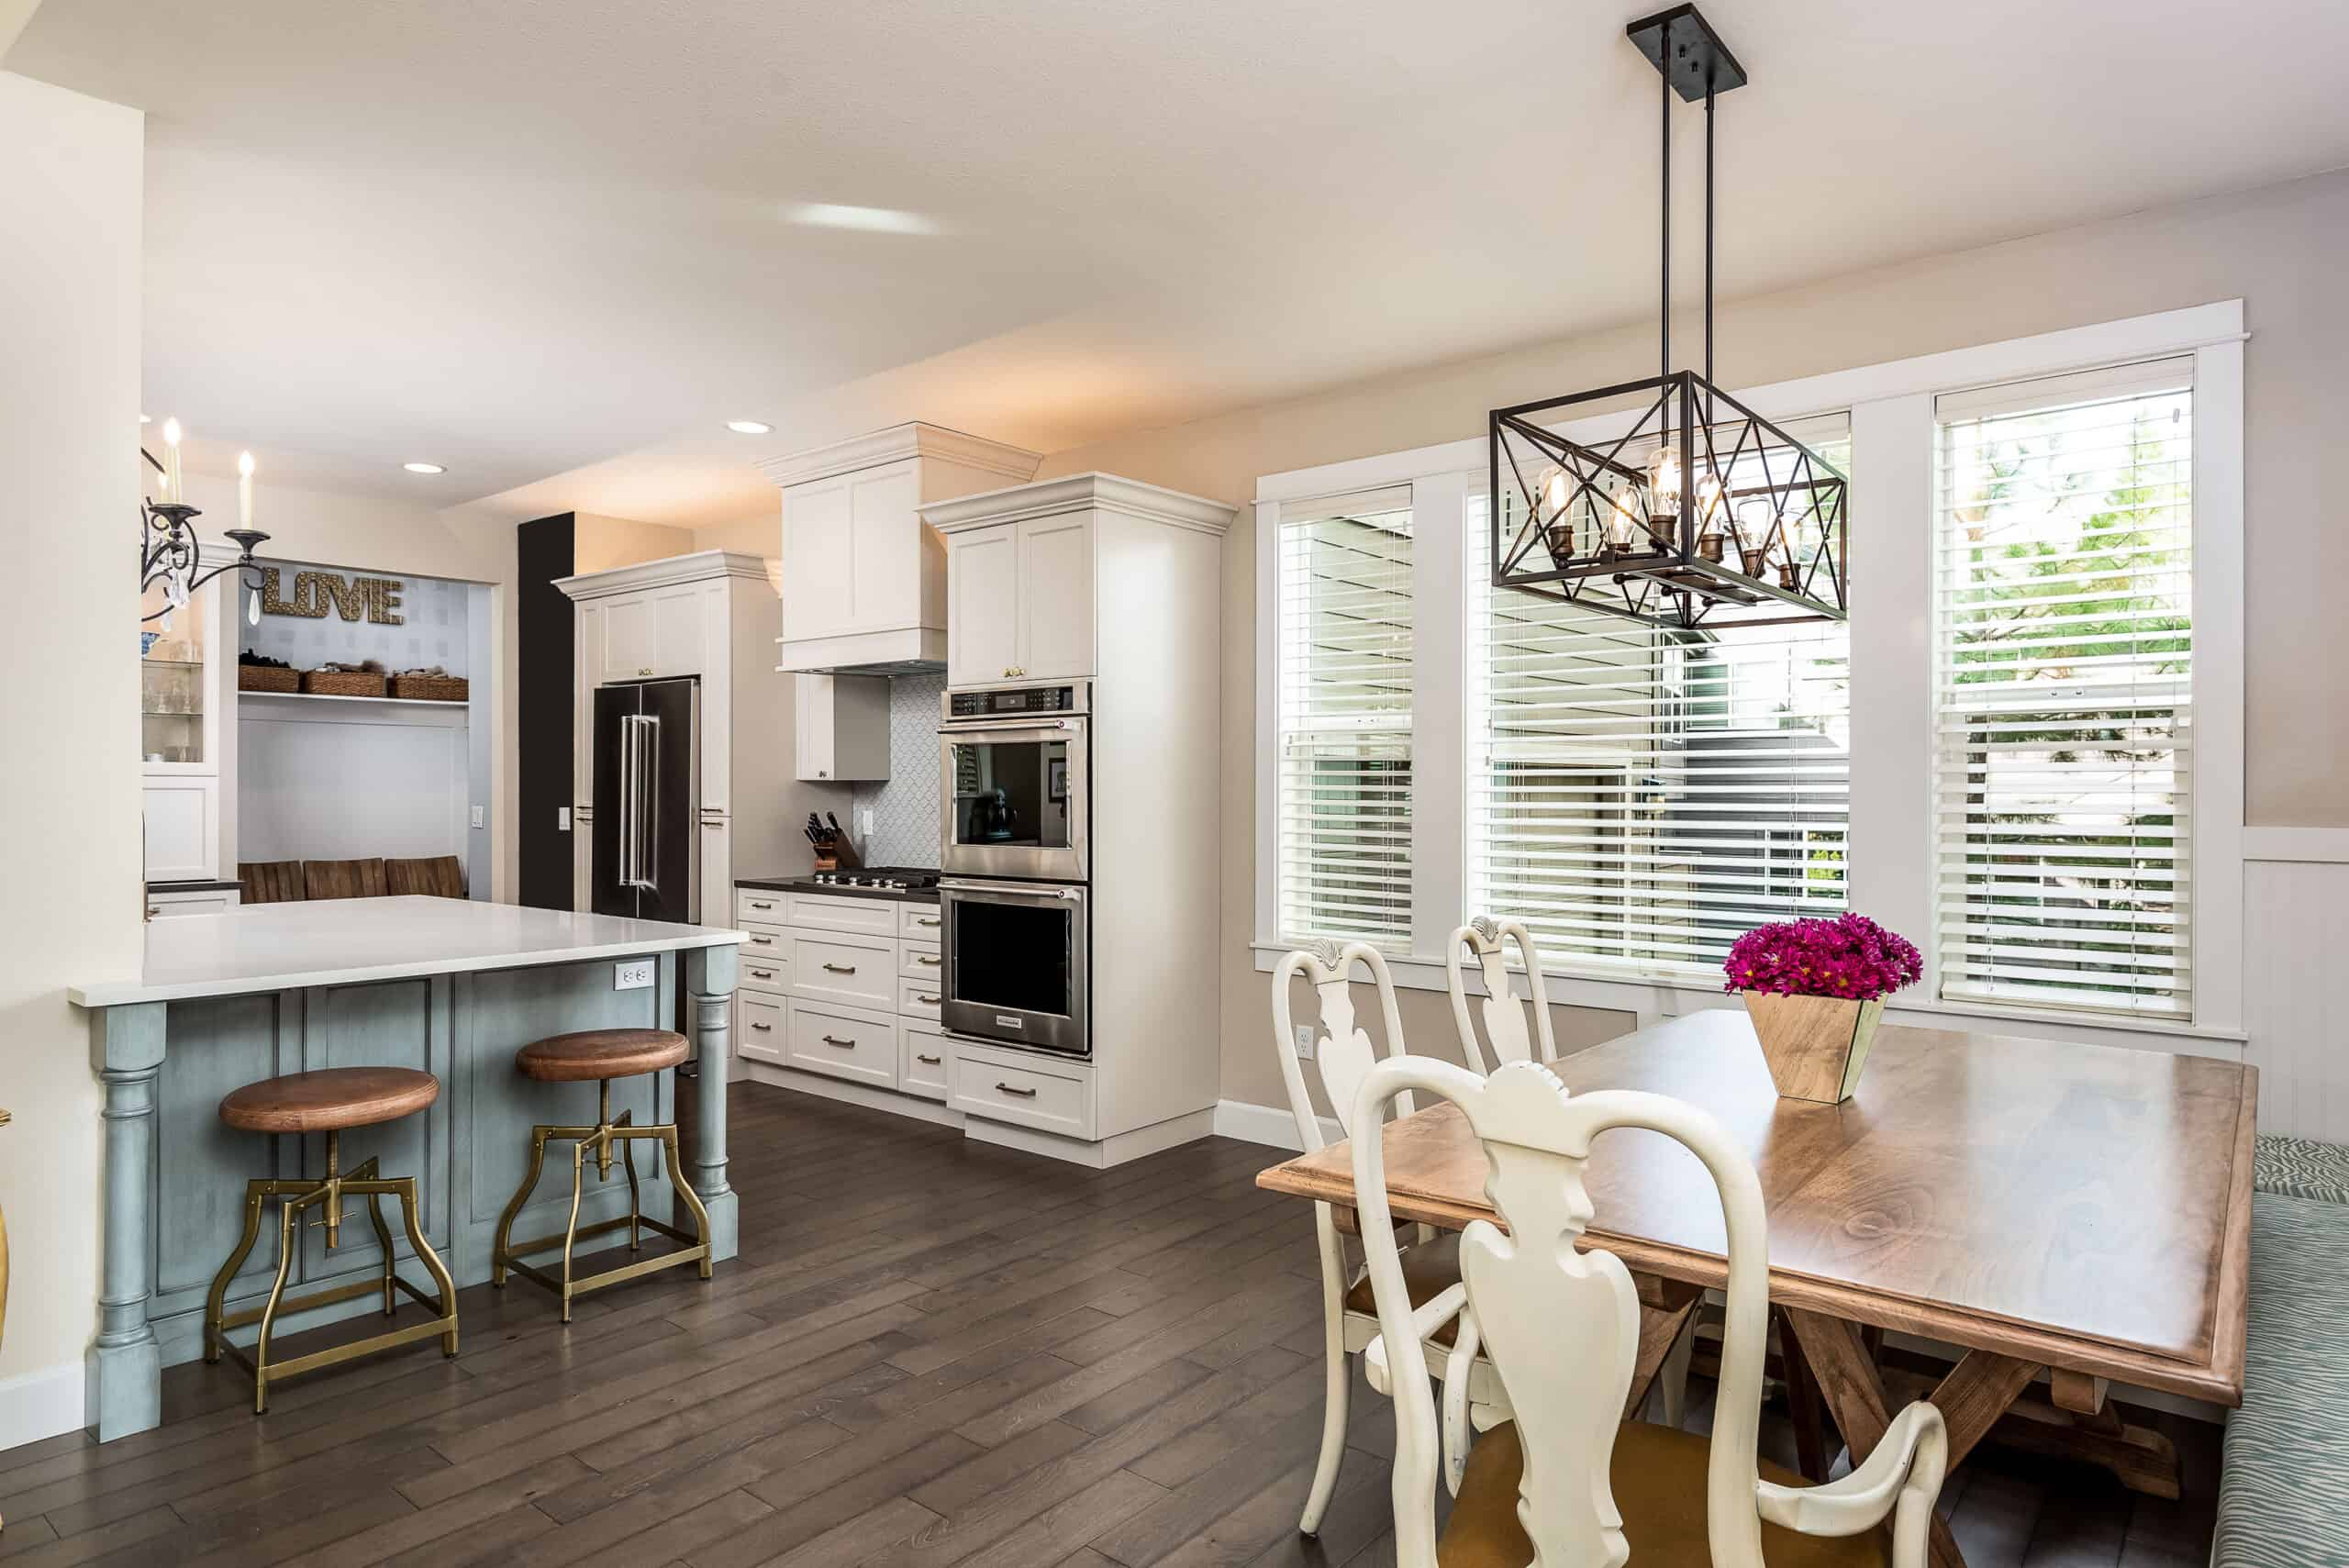 A kitchen designed for entertaining with island and banquette seating